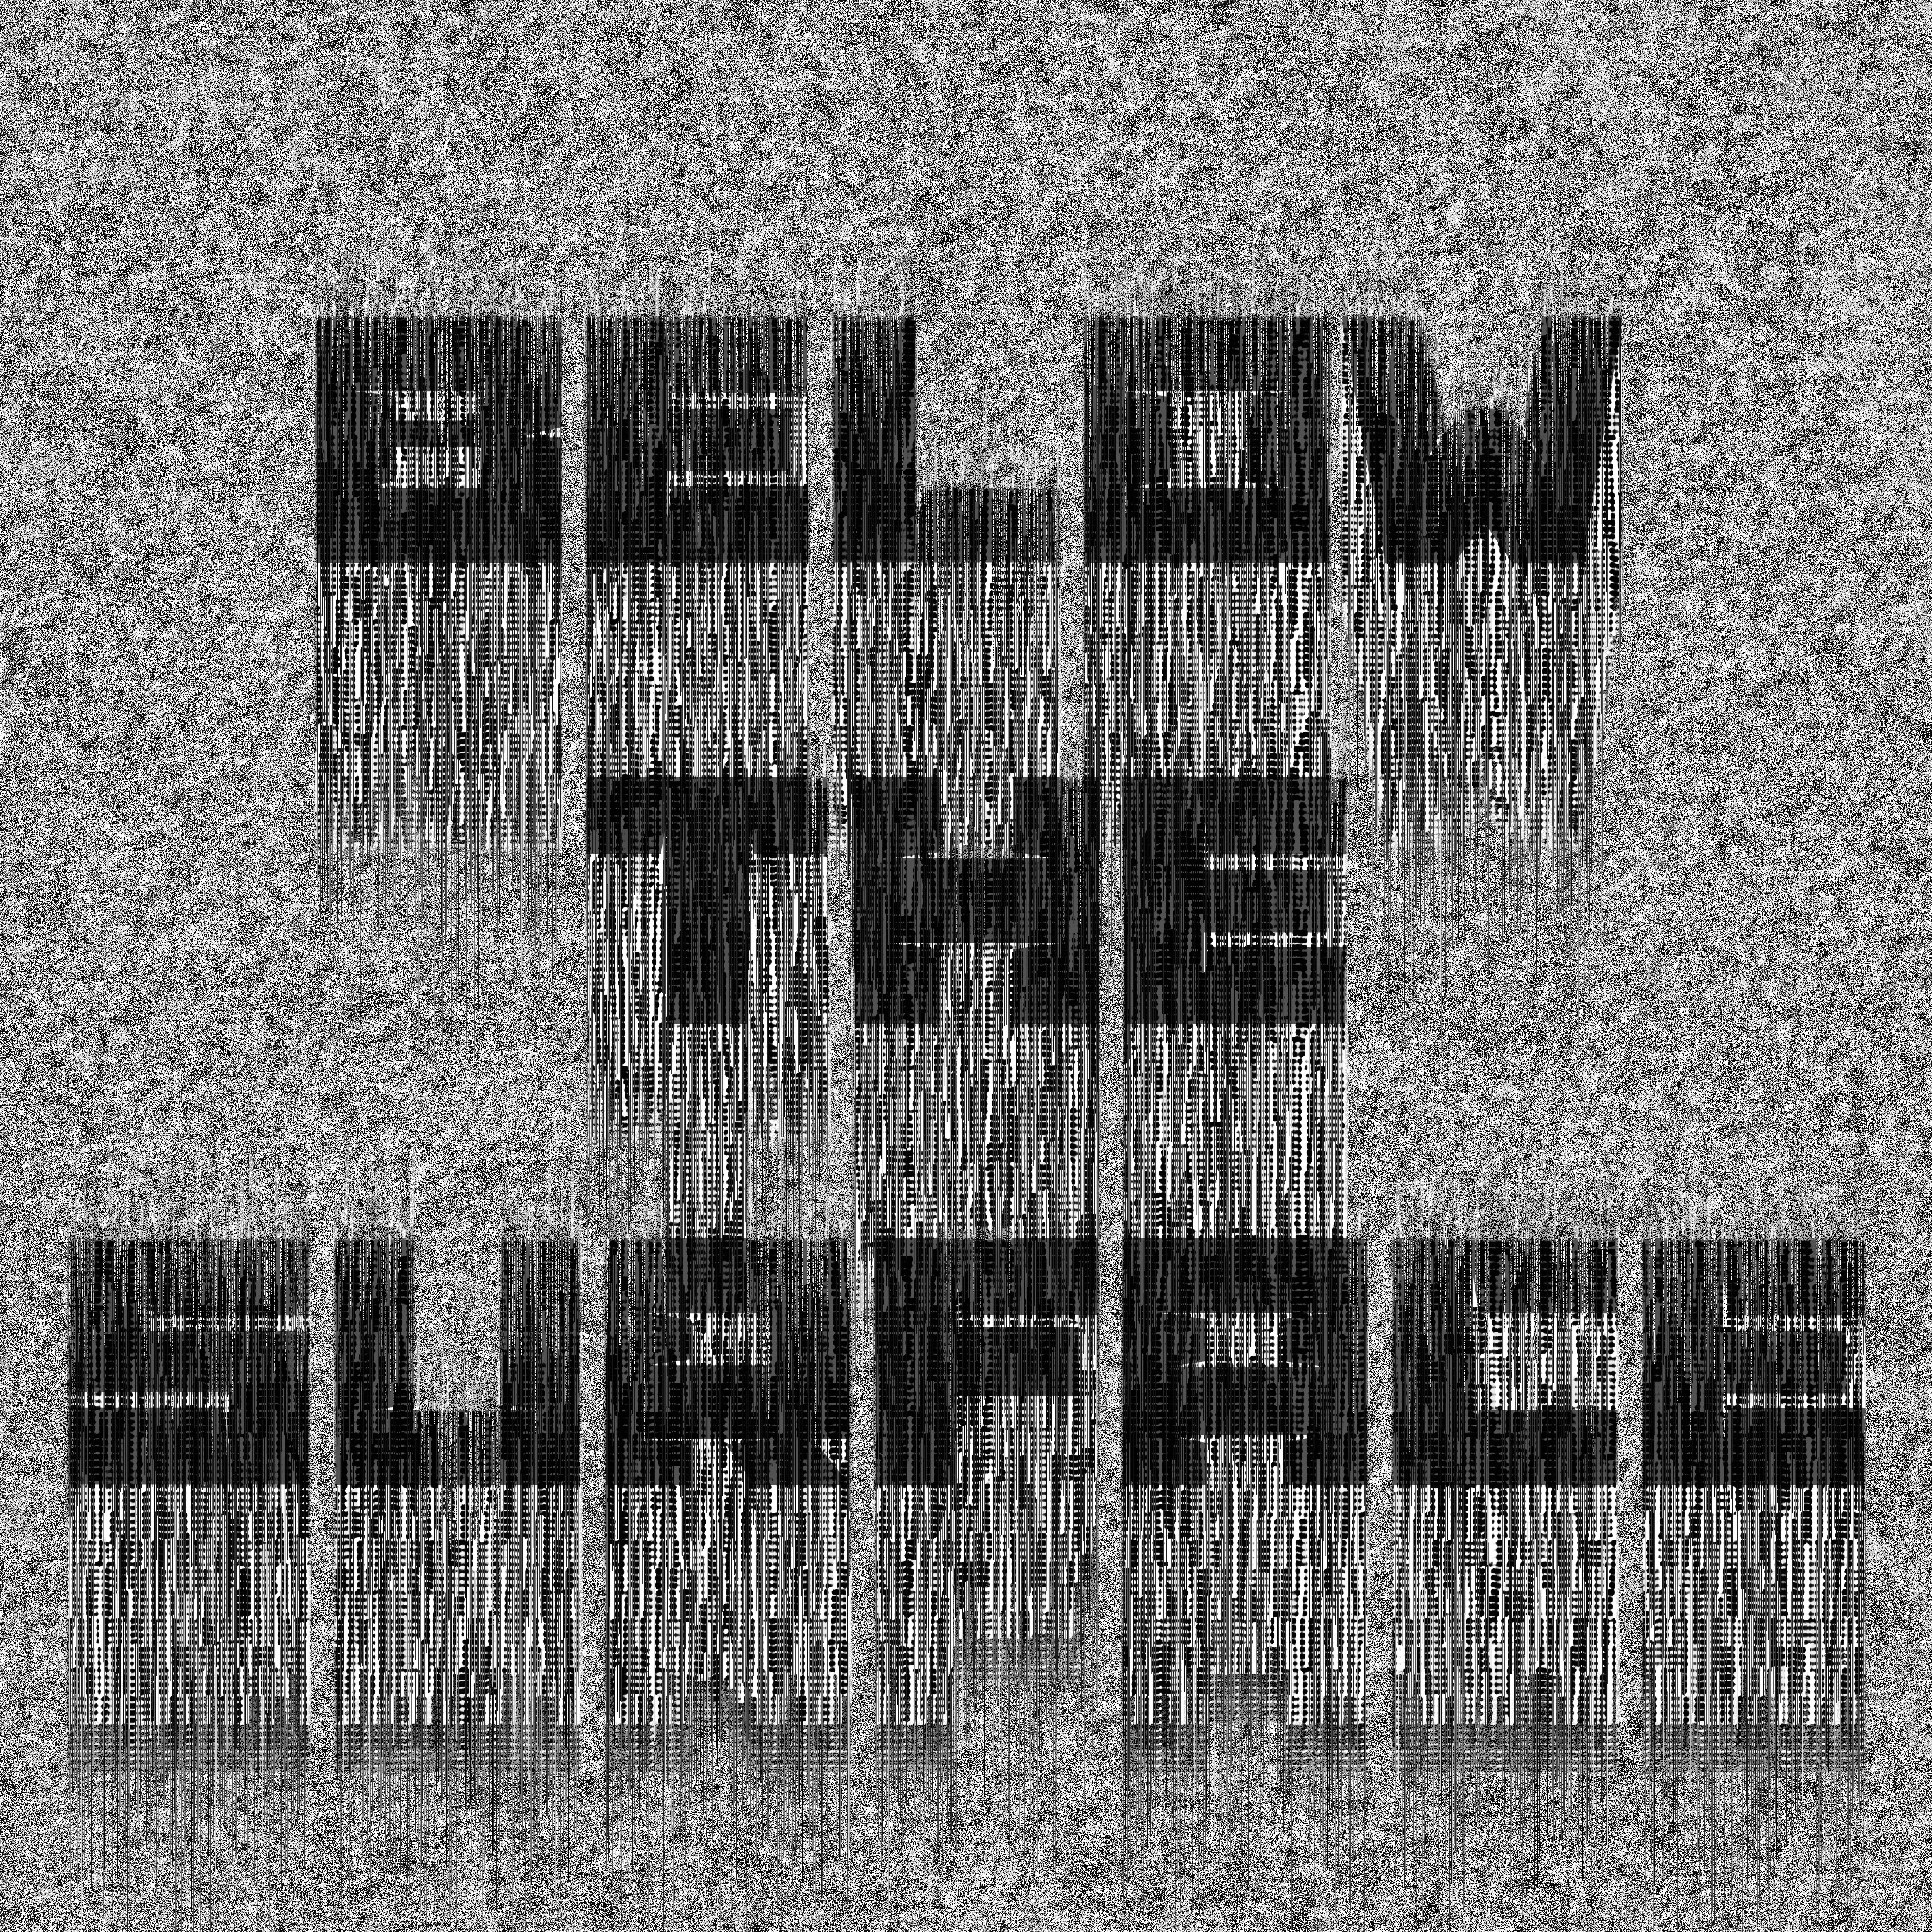 Below the surface текст